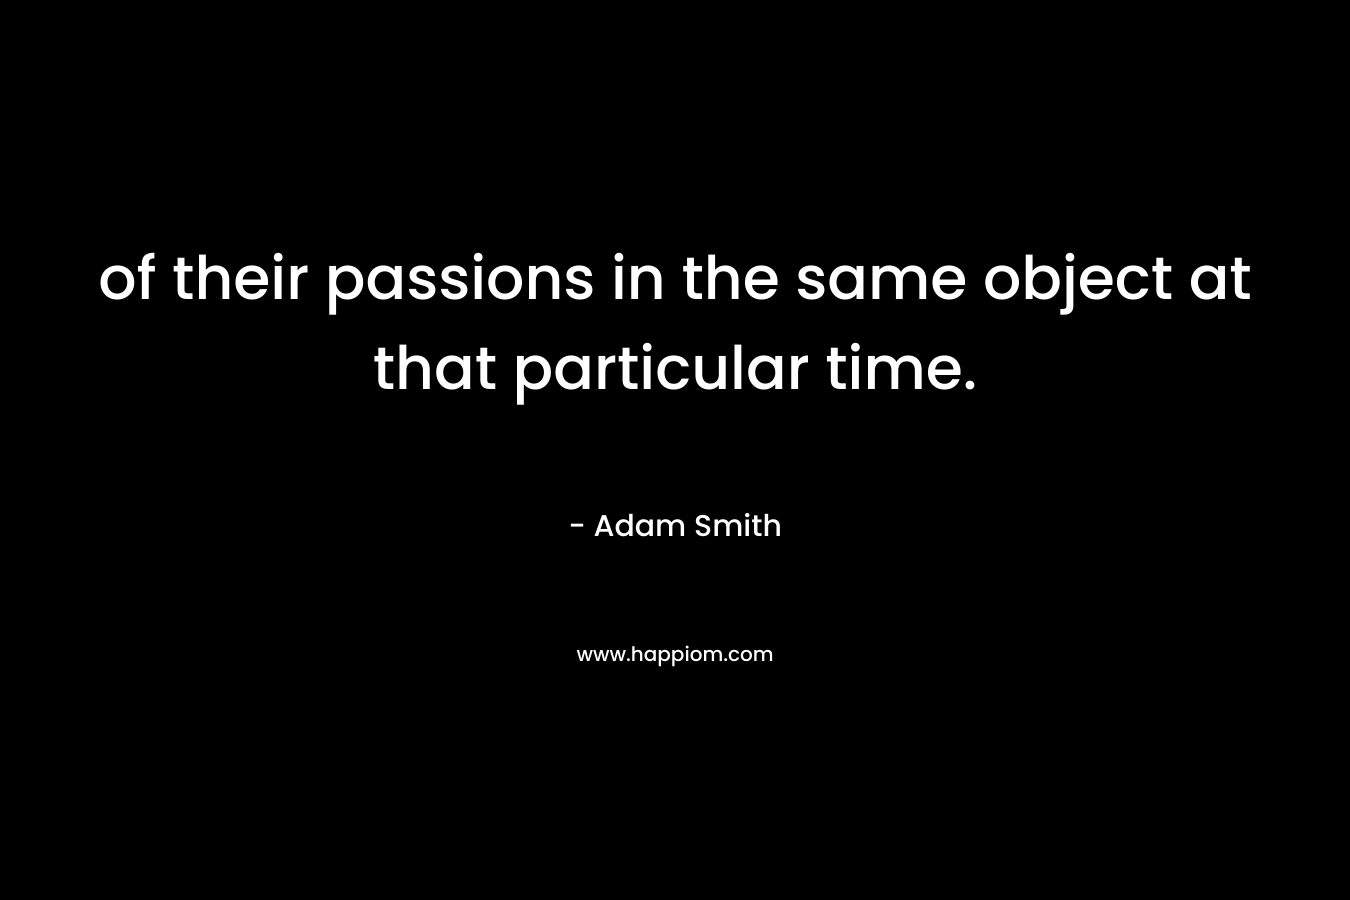 of their passions in the same object at that particular time.